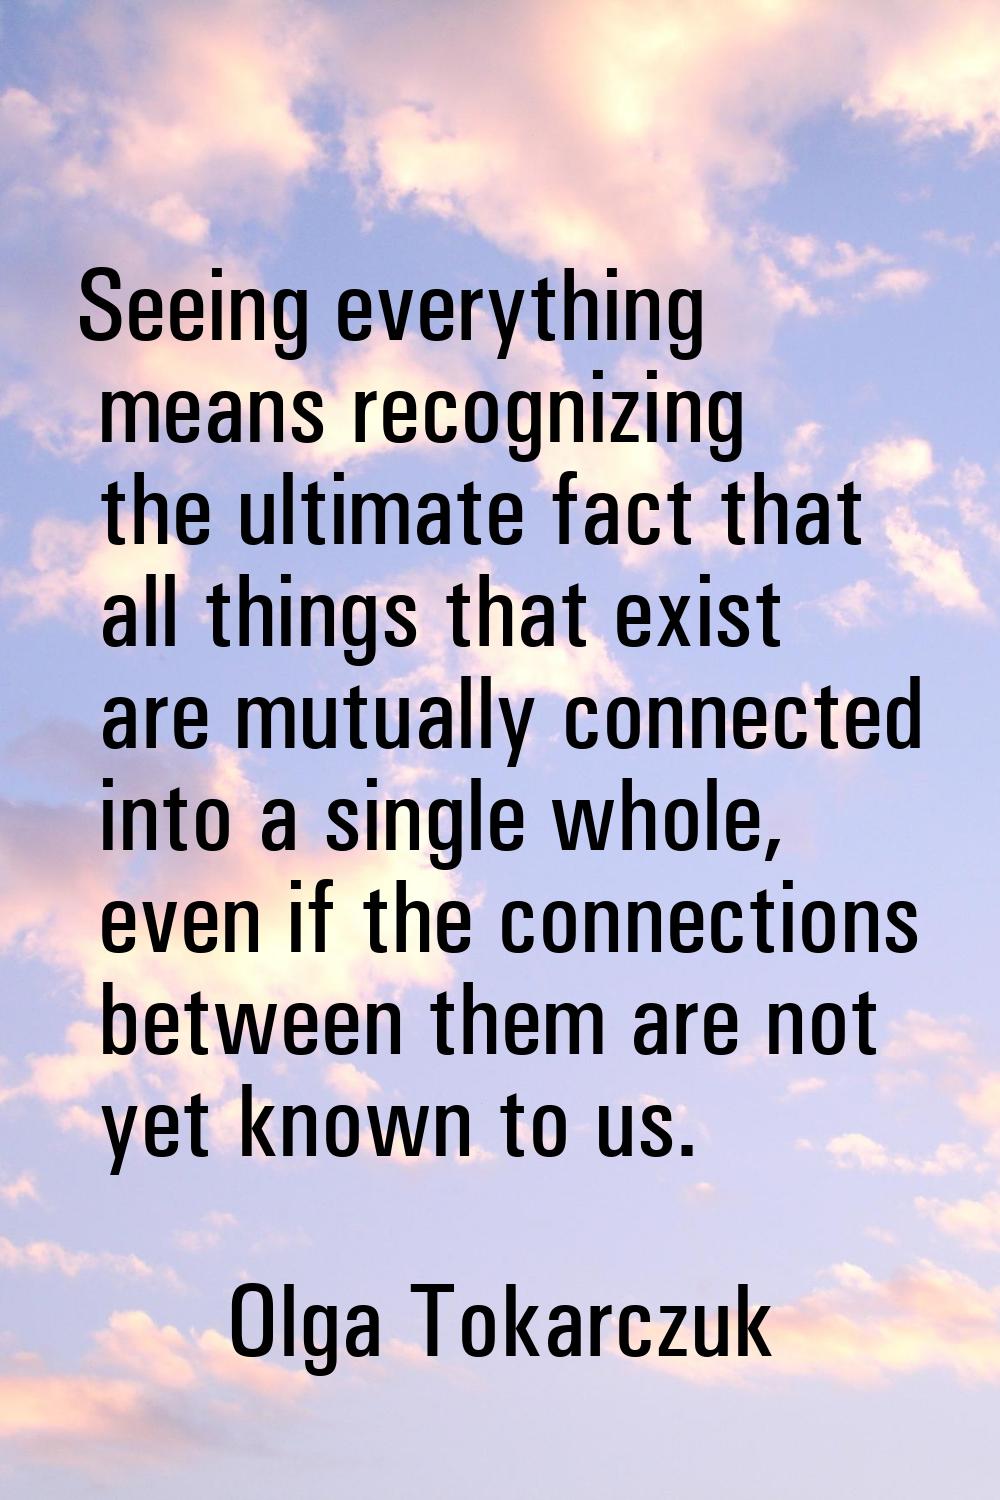 Seeing everything means recognizing the ultimate fact that all things that exist are mutually conne